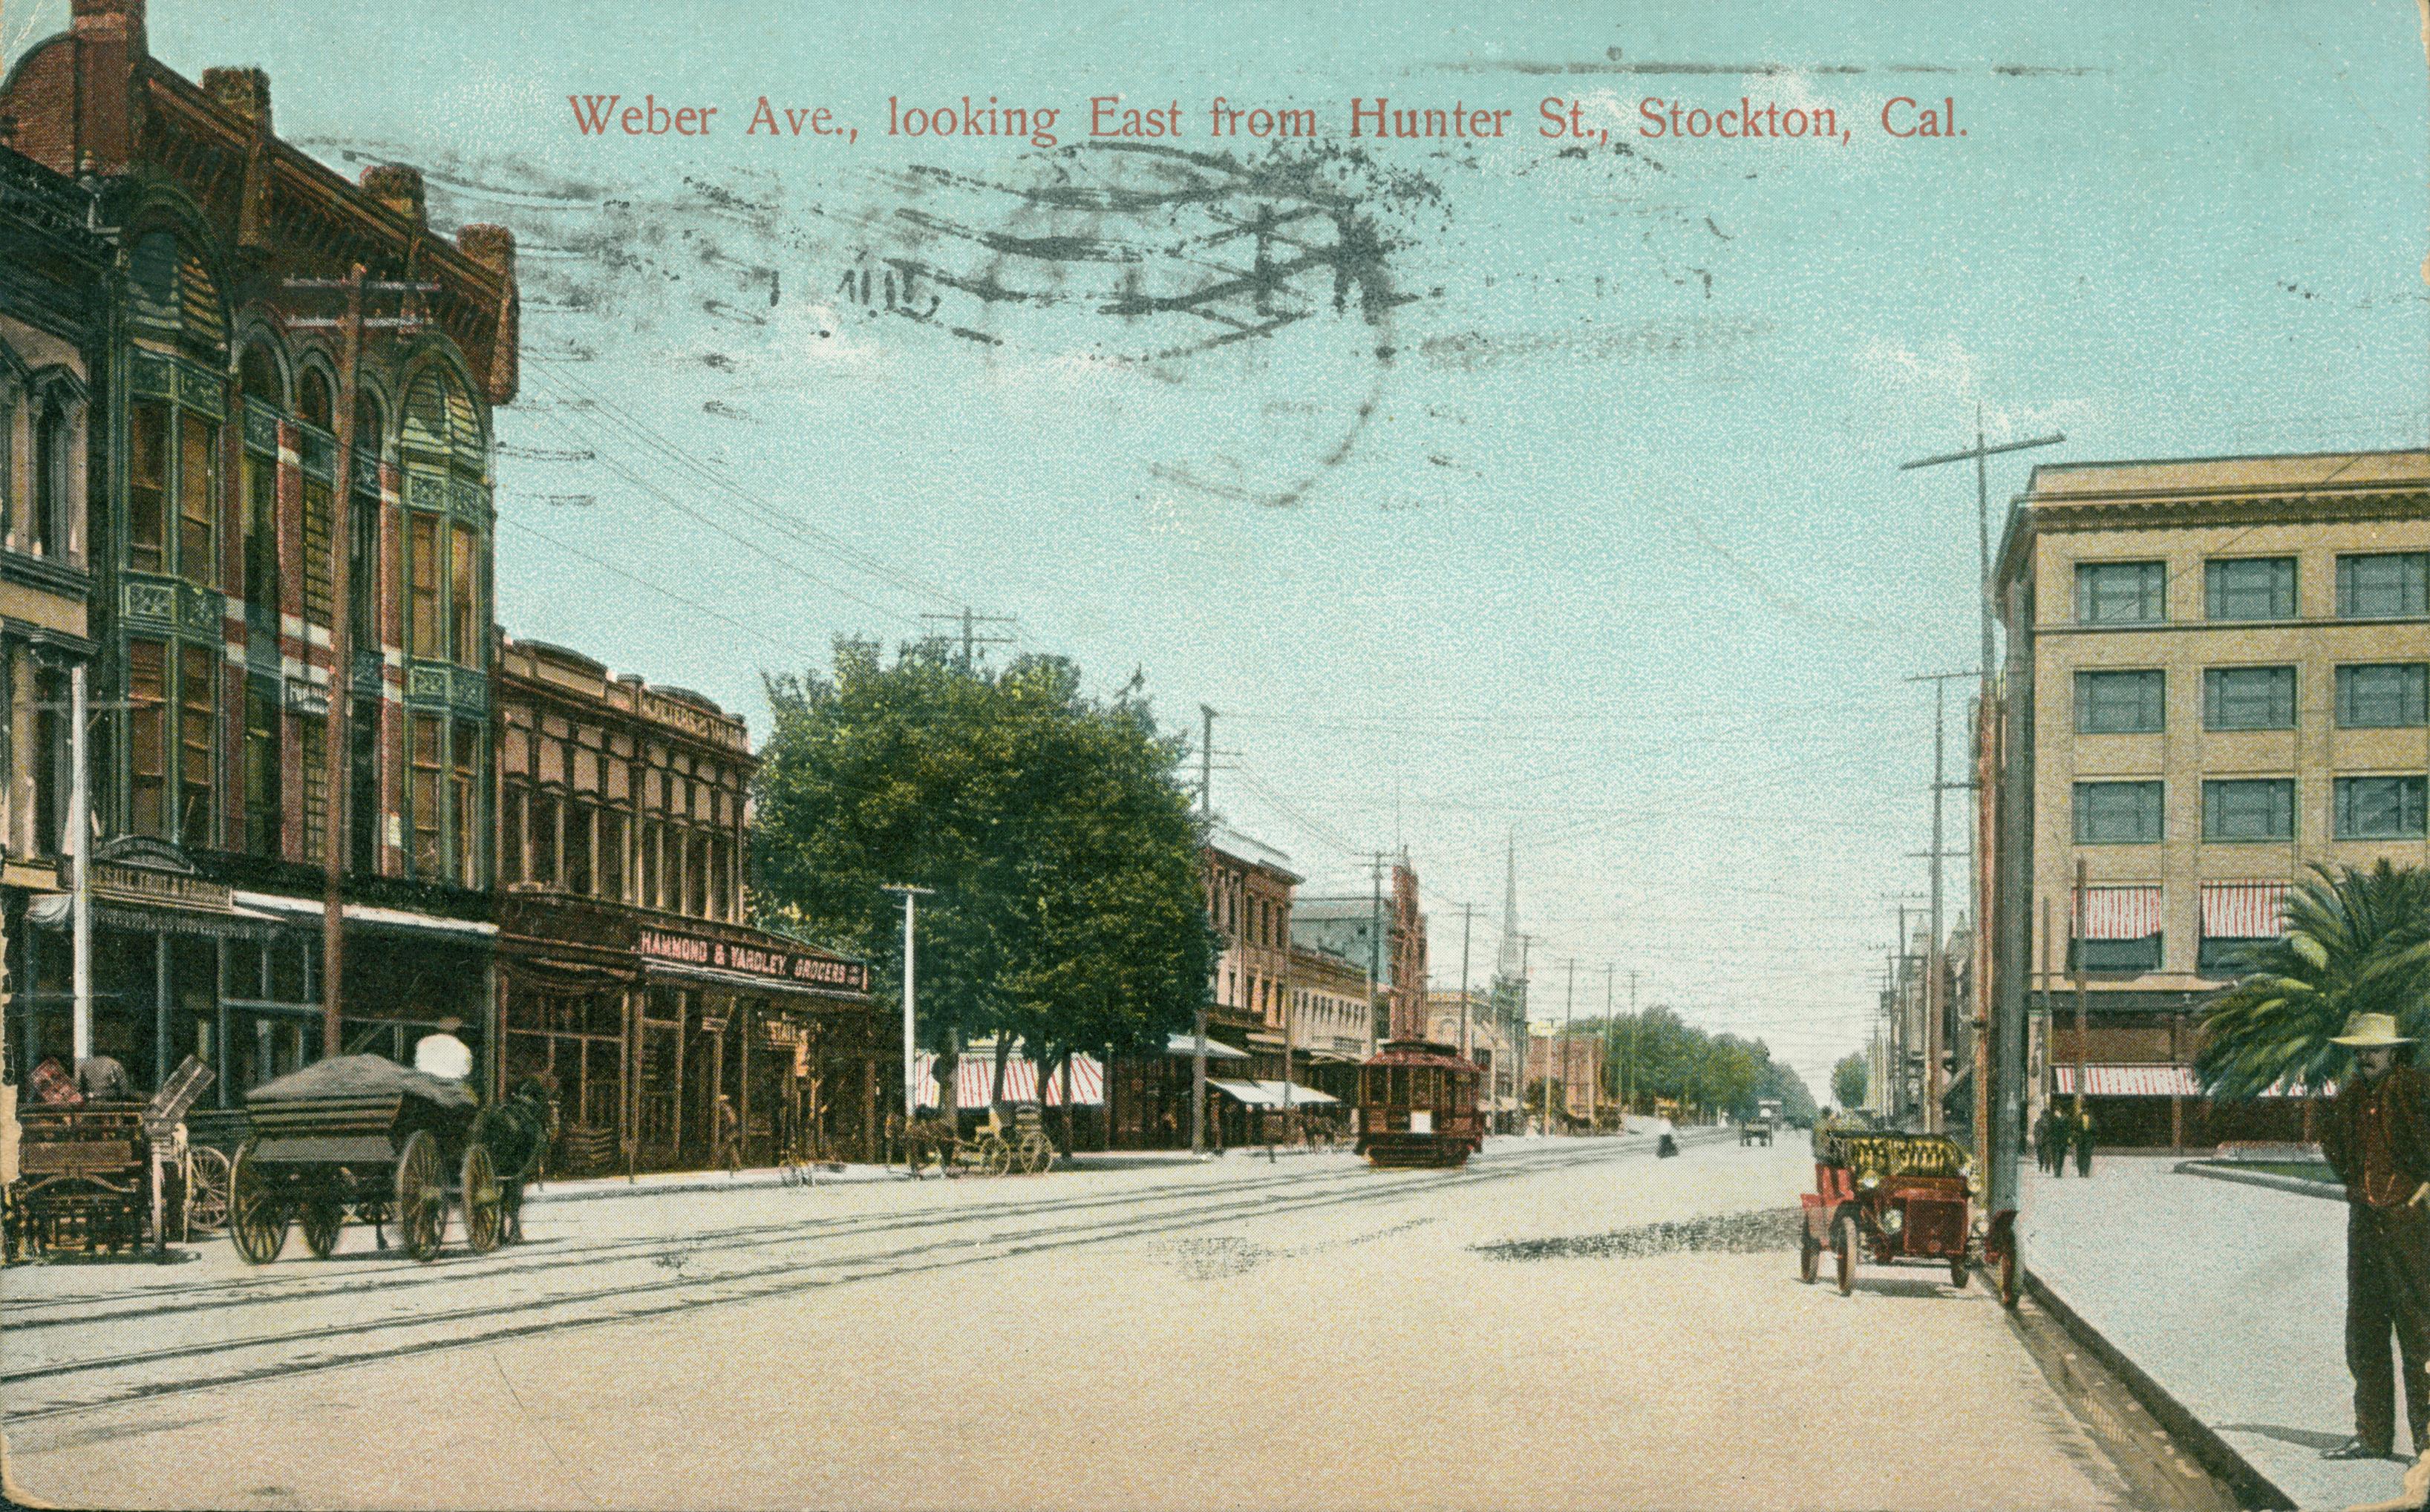 View of Main Street with trolley car and tracks down the center of the street, person waiting on corner, automobiles and wagons along side the street